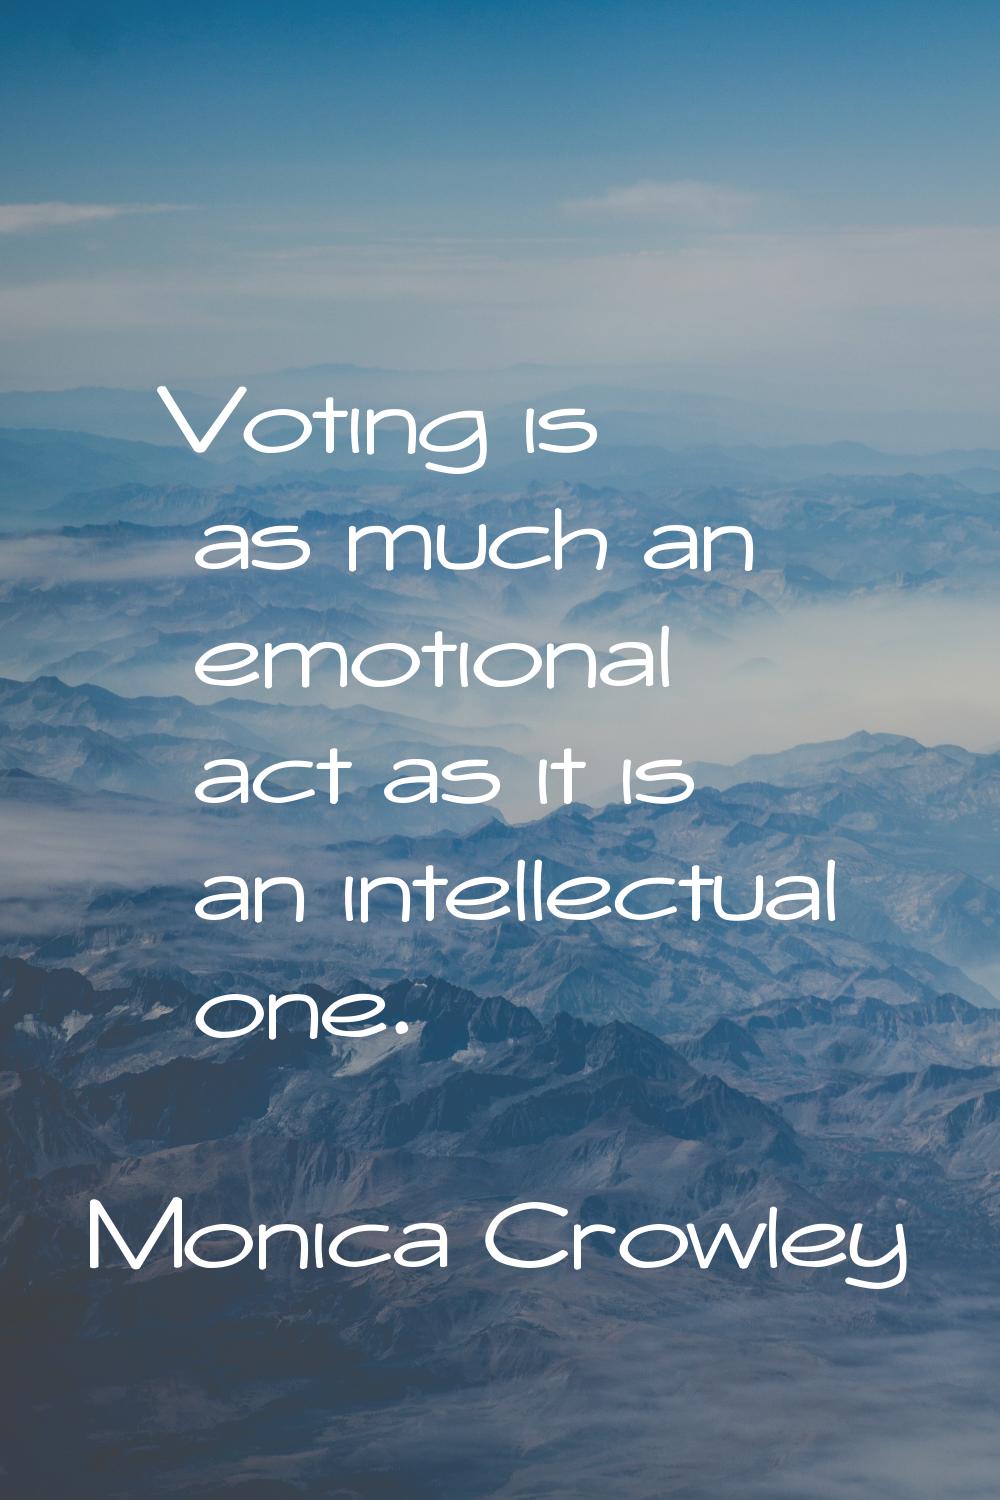 Voting is as much an emotional act as it is an intellectual one.